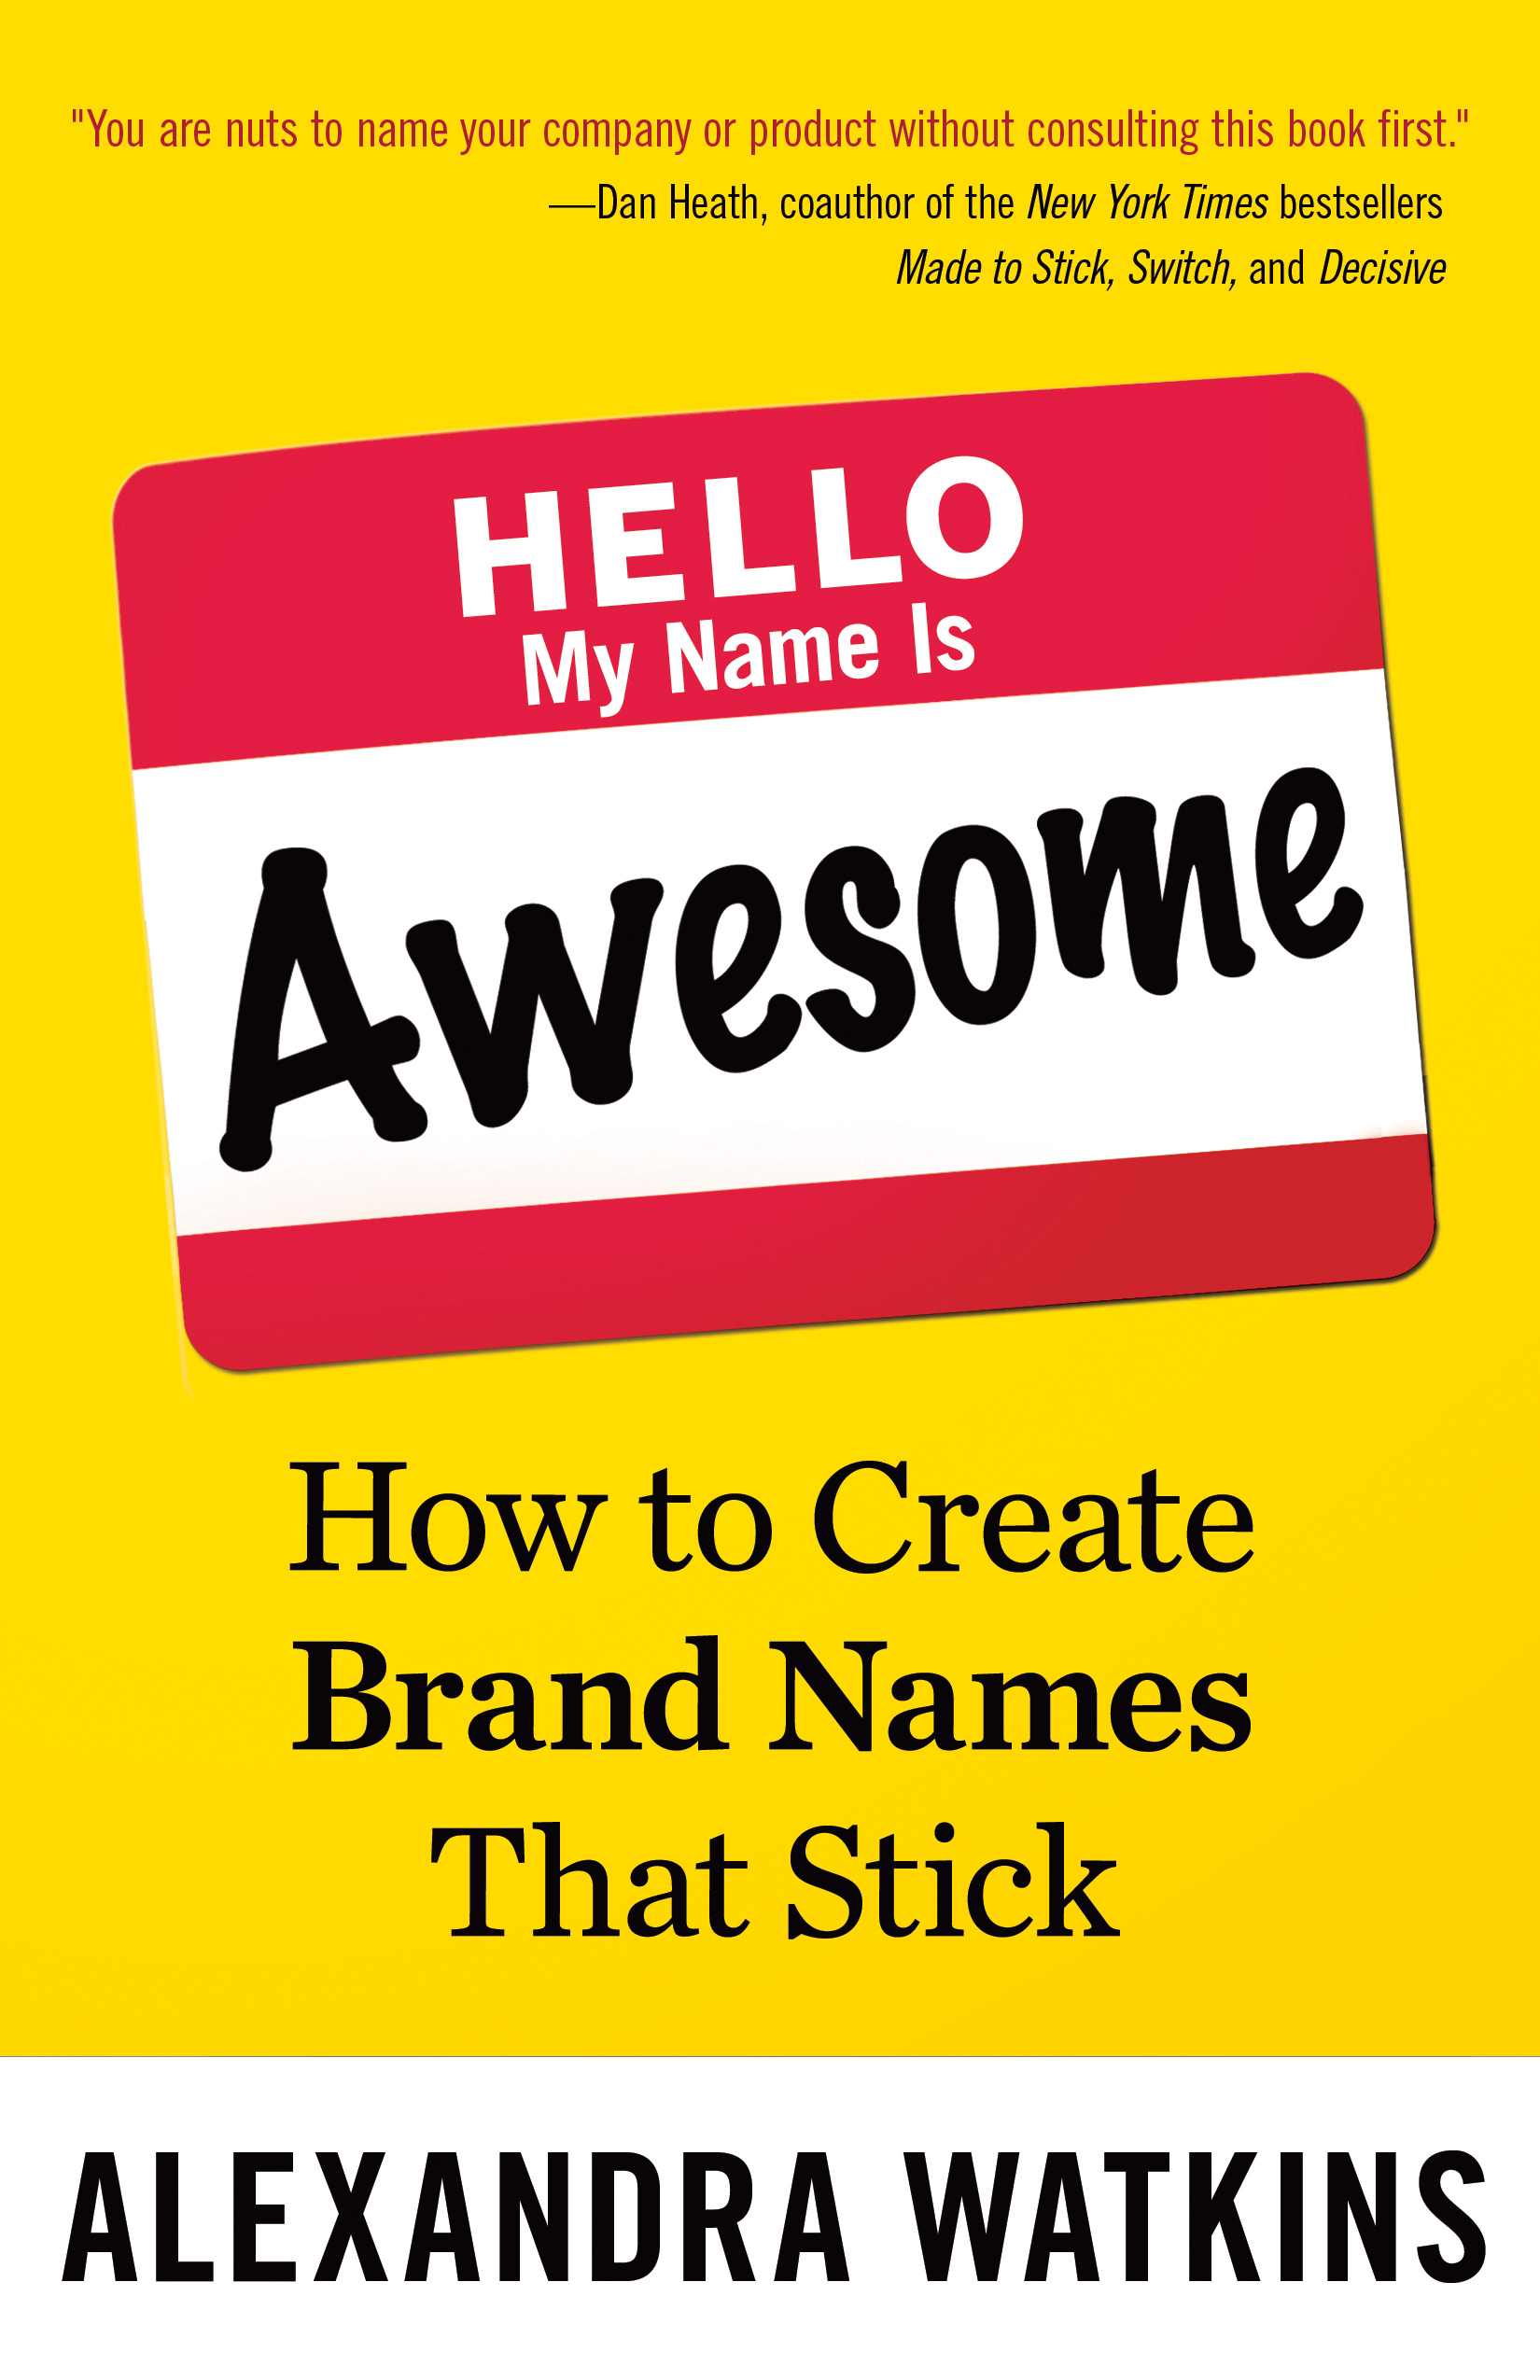 “Hello My Name Is Awesome” Named an Inc. Magazine Top Marketing Book of